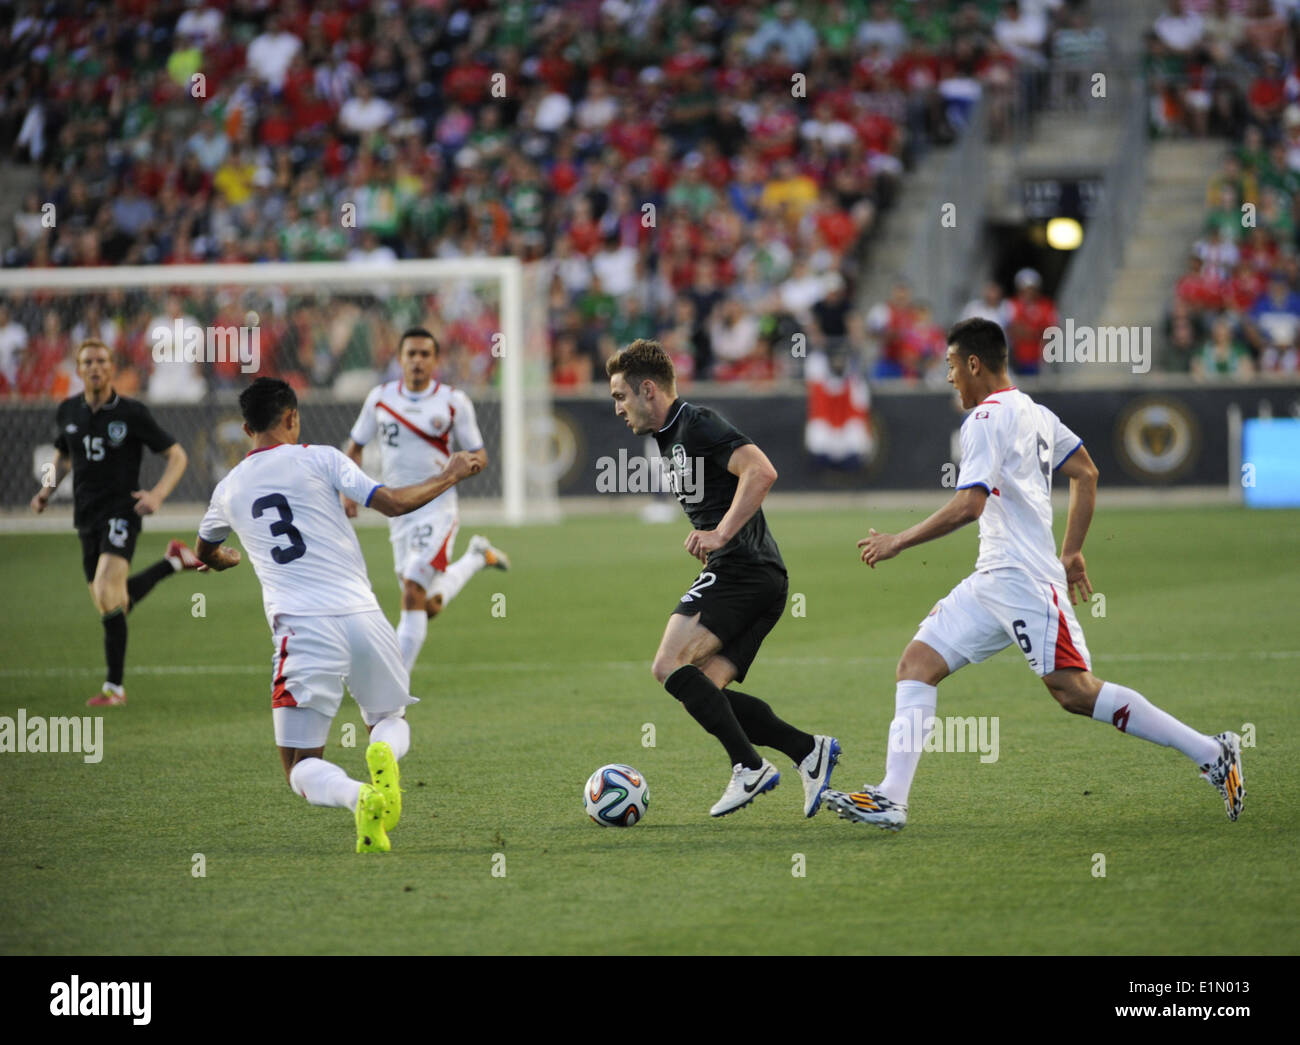 Chester, Pennsylvania, USA. 6th June, 2014. Costs Rica players OSCAR DUARTE (6) and GIANCARLO GONZALEZ (3) in action against Ireland player, KEVIN DOYLE (22) during the Freedom Cup match held at PPL Park in Chester Pa Credit:  Ricky Fitchett/ZUMAPRESS.com/Alamy Live News Stock Photo